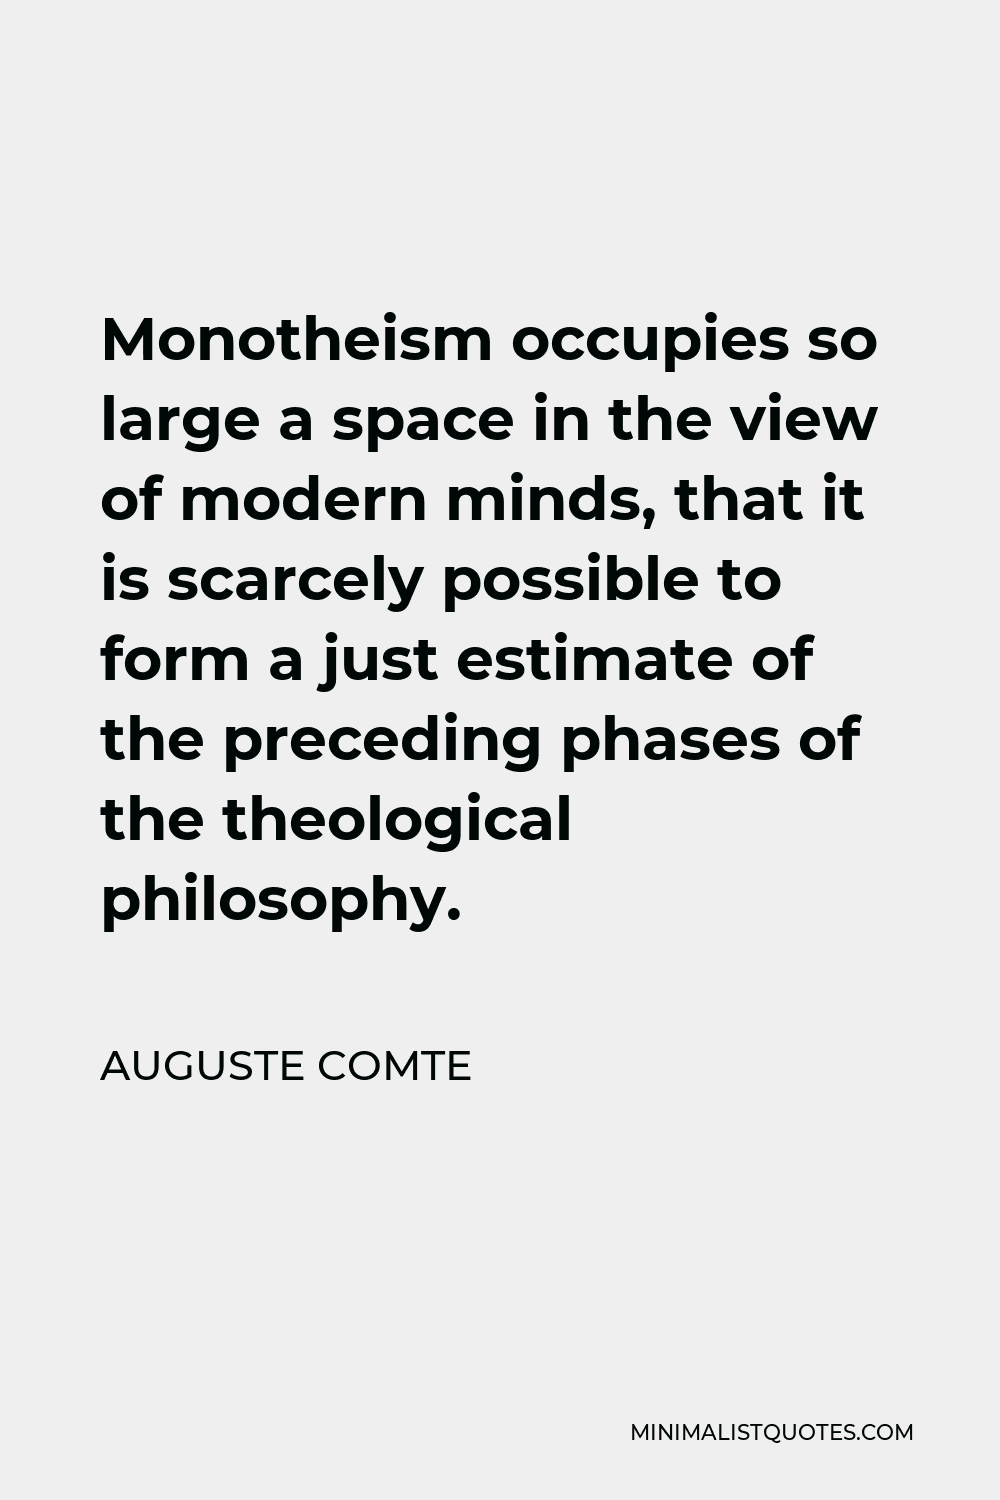 Auguste Comte Quote - Monotheism occupies so large a space in the view of modern minds, that it is scarcely possible to form a just estimate of the preceding phases of the theological philosophy.